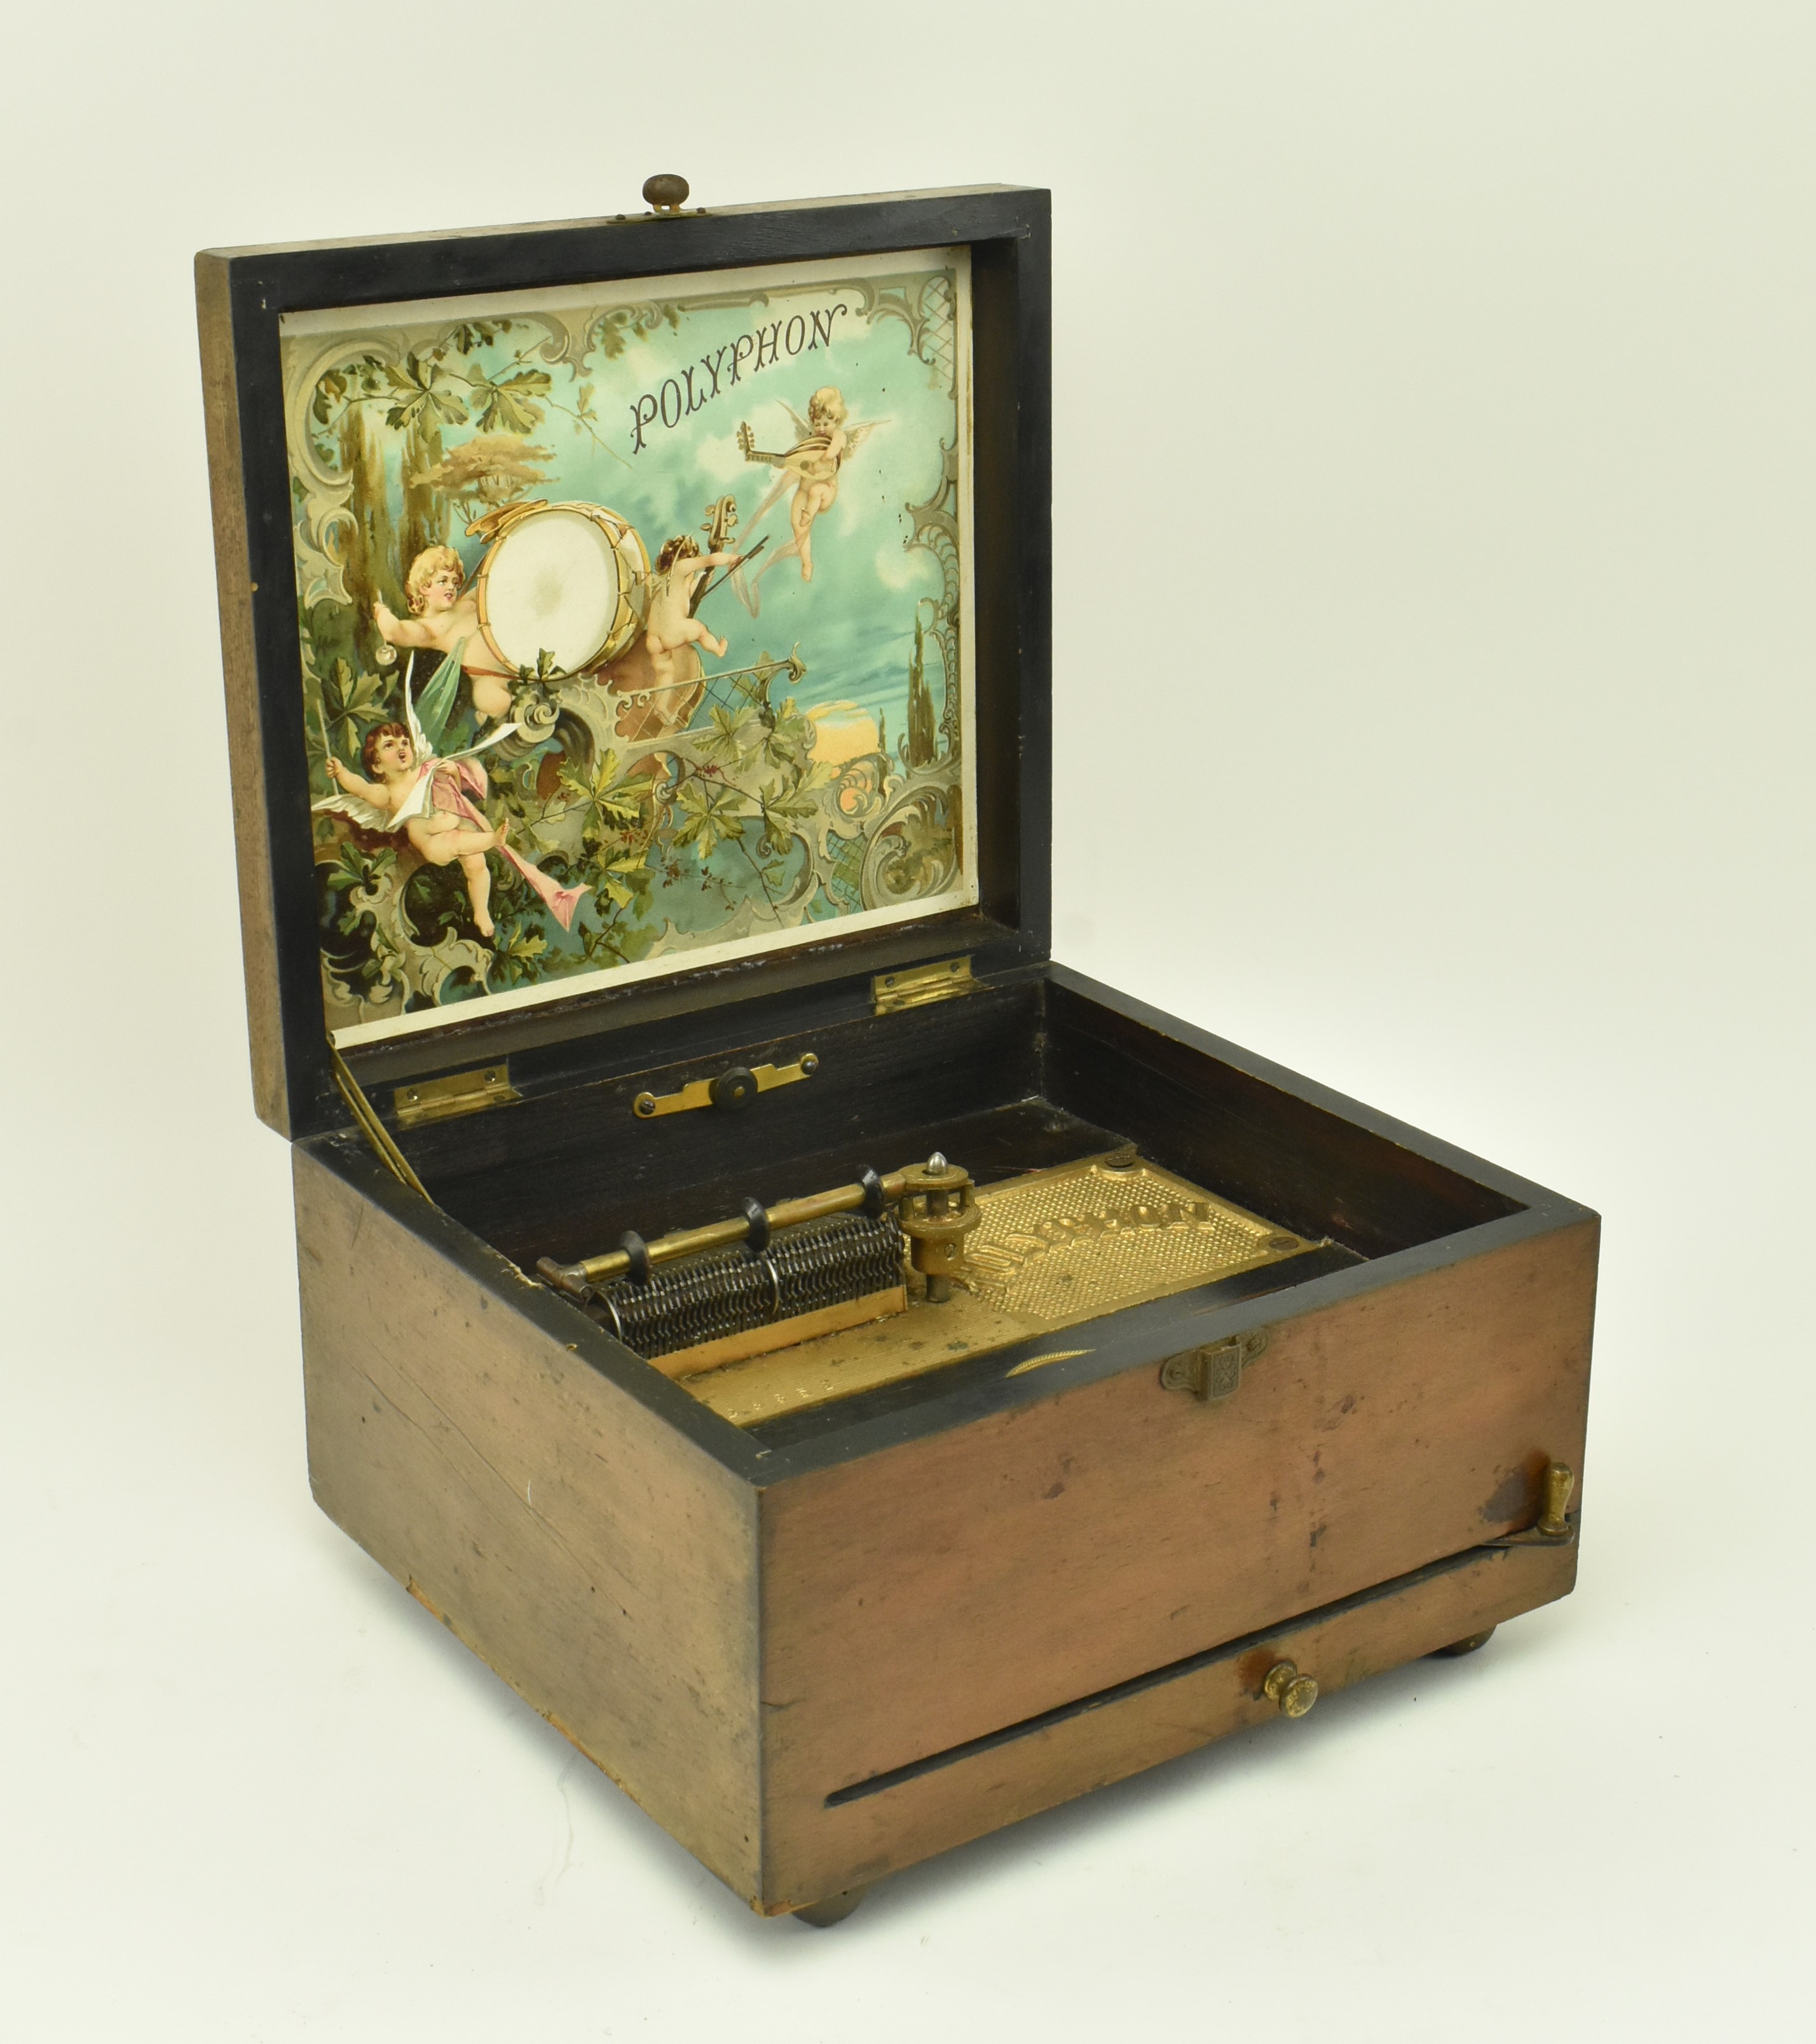 FRENCH 19TH CENTURY POLYPHON DISC MUSIC BOX